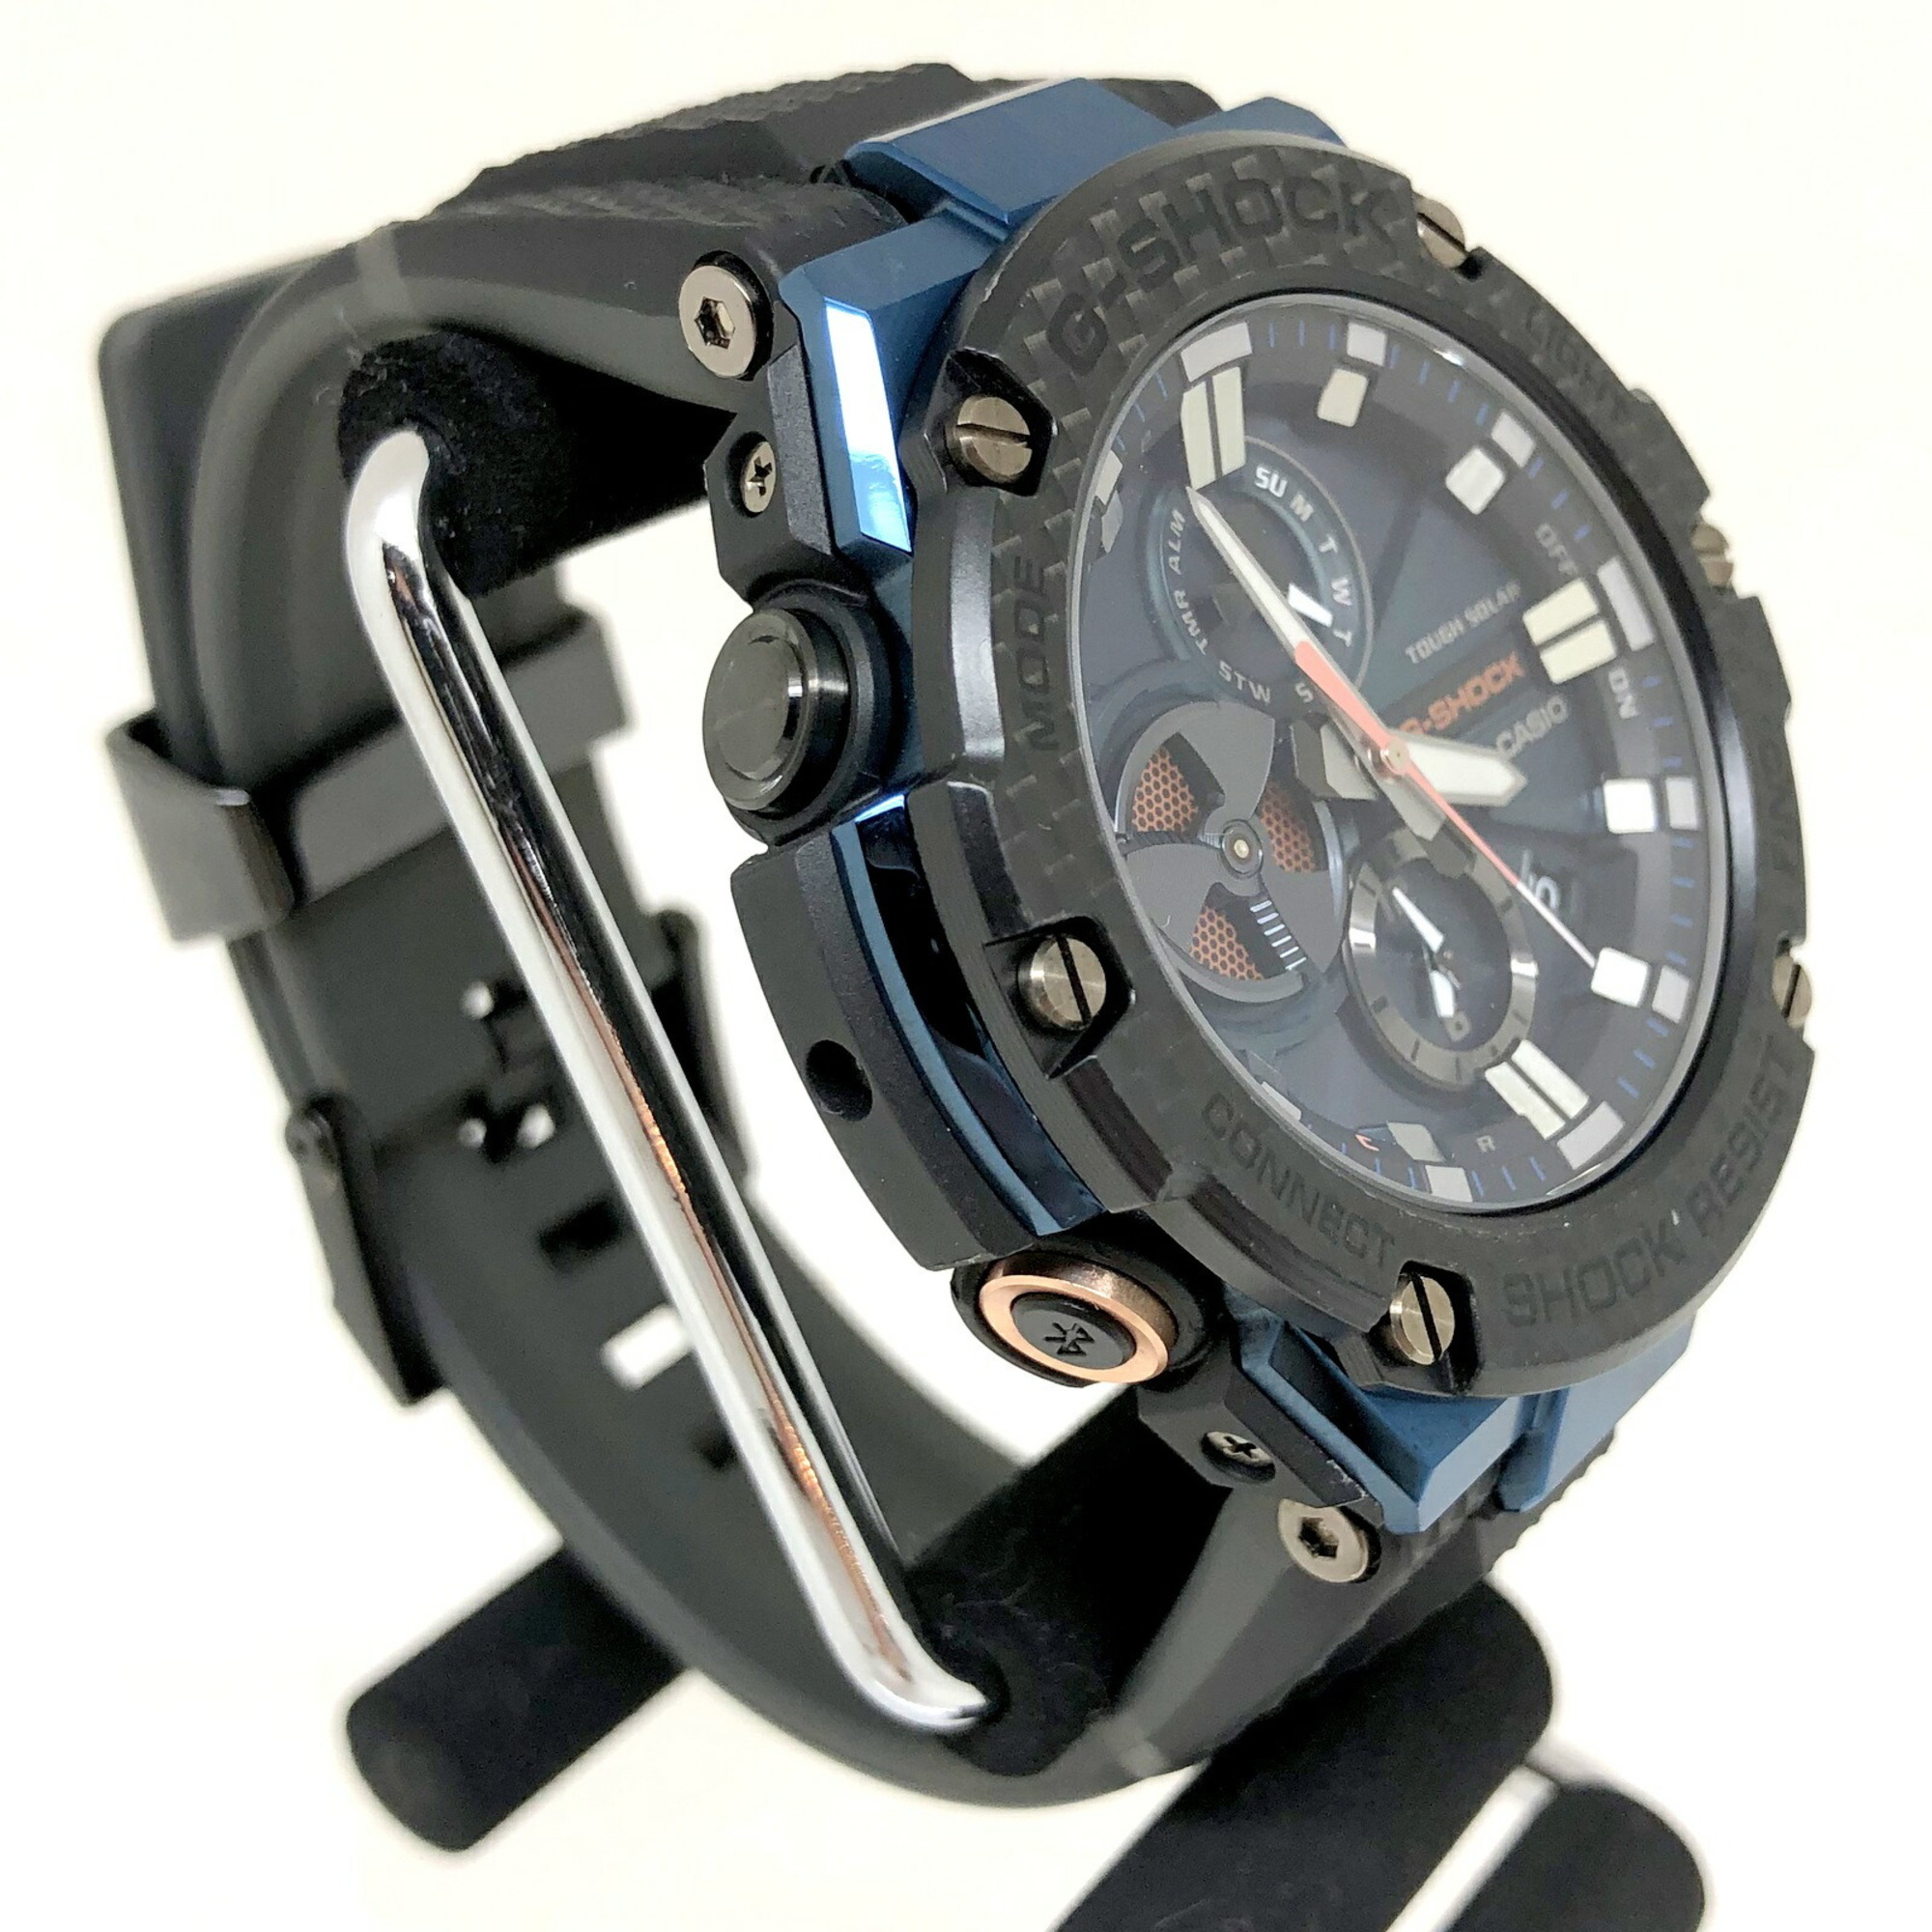 CASIO Casio G-SHOCK Watch GST-B100XB-2A G-STEEL G Steel Bluetooth Equipped with Toughness Carbon Smartphone Link Tough Solar Black Blue Analog Men's IT9DO8GWZML9